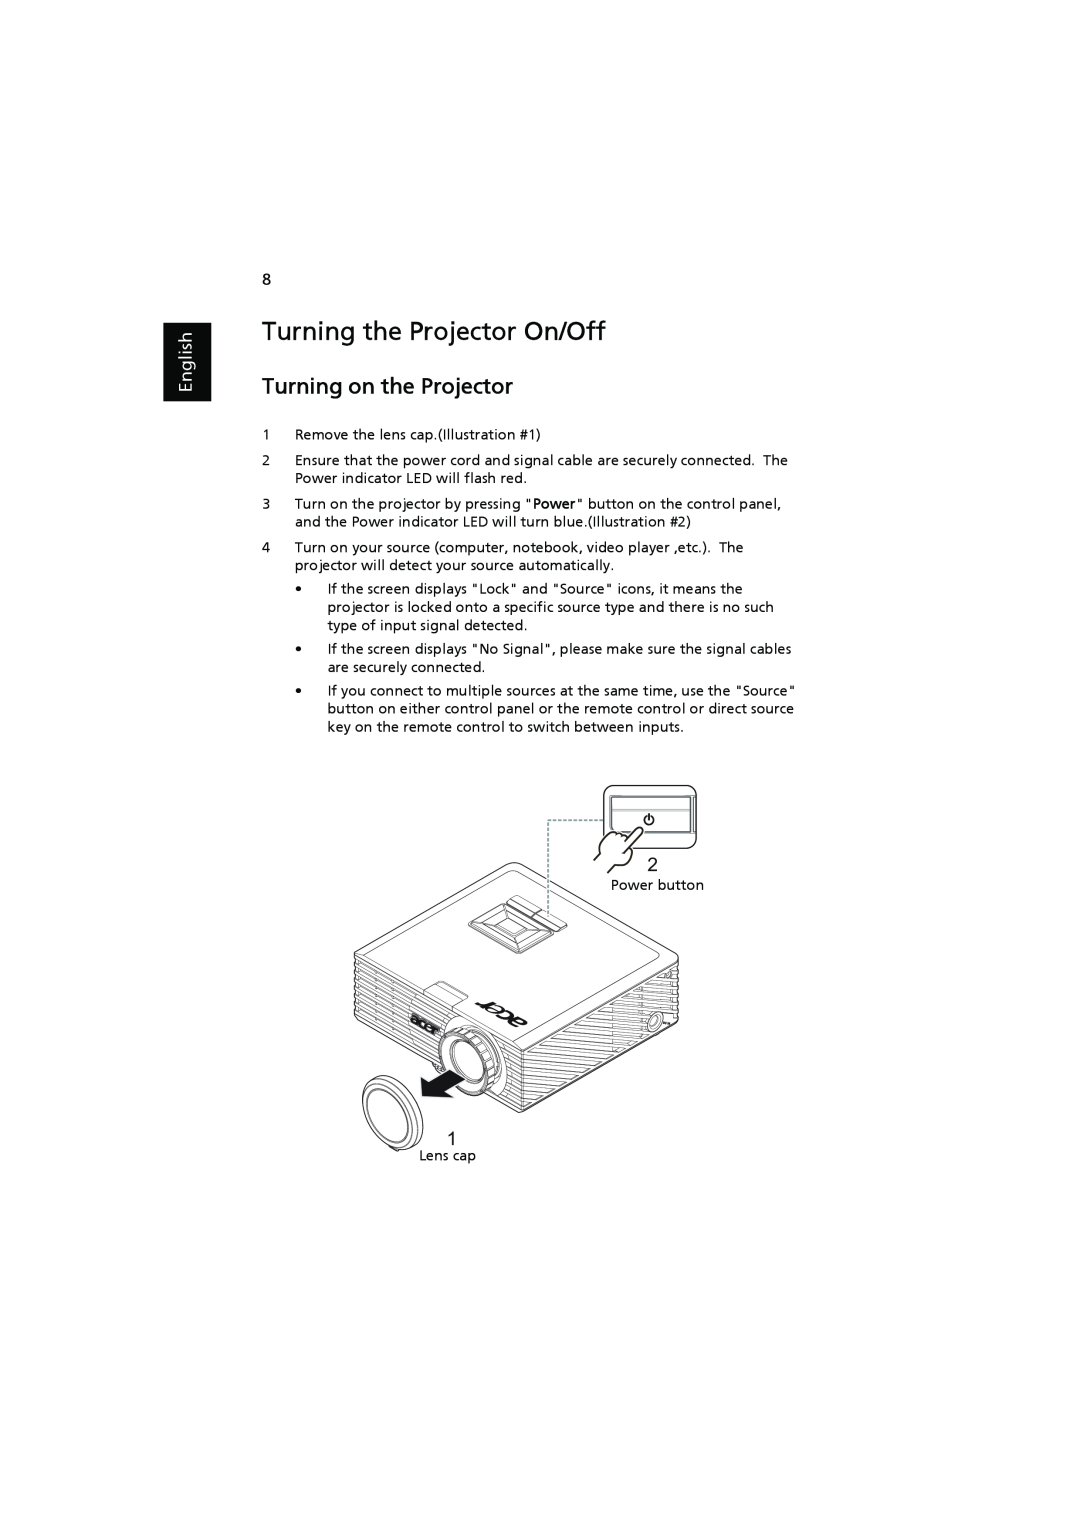 Acer K11 manual Turning the Projector On/Off, Turning on the Projector, English 